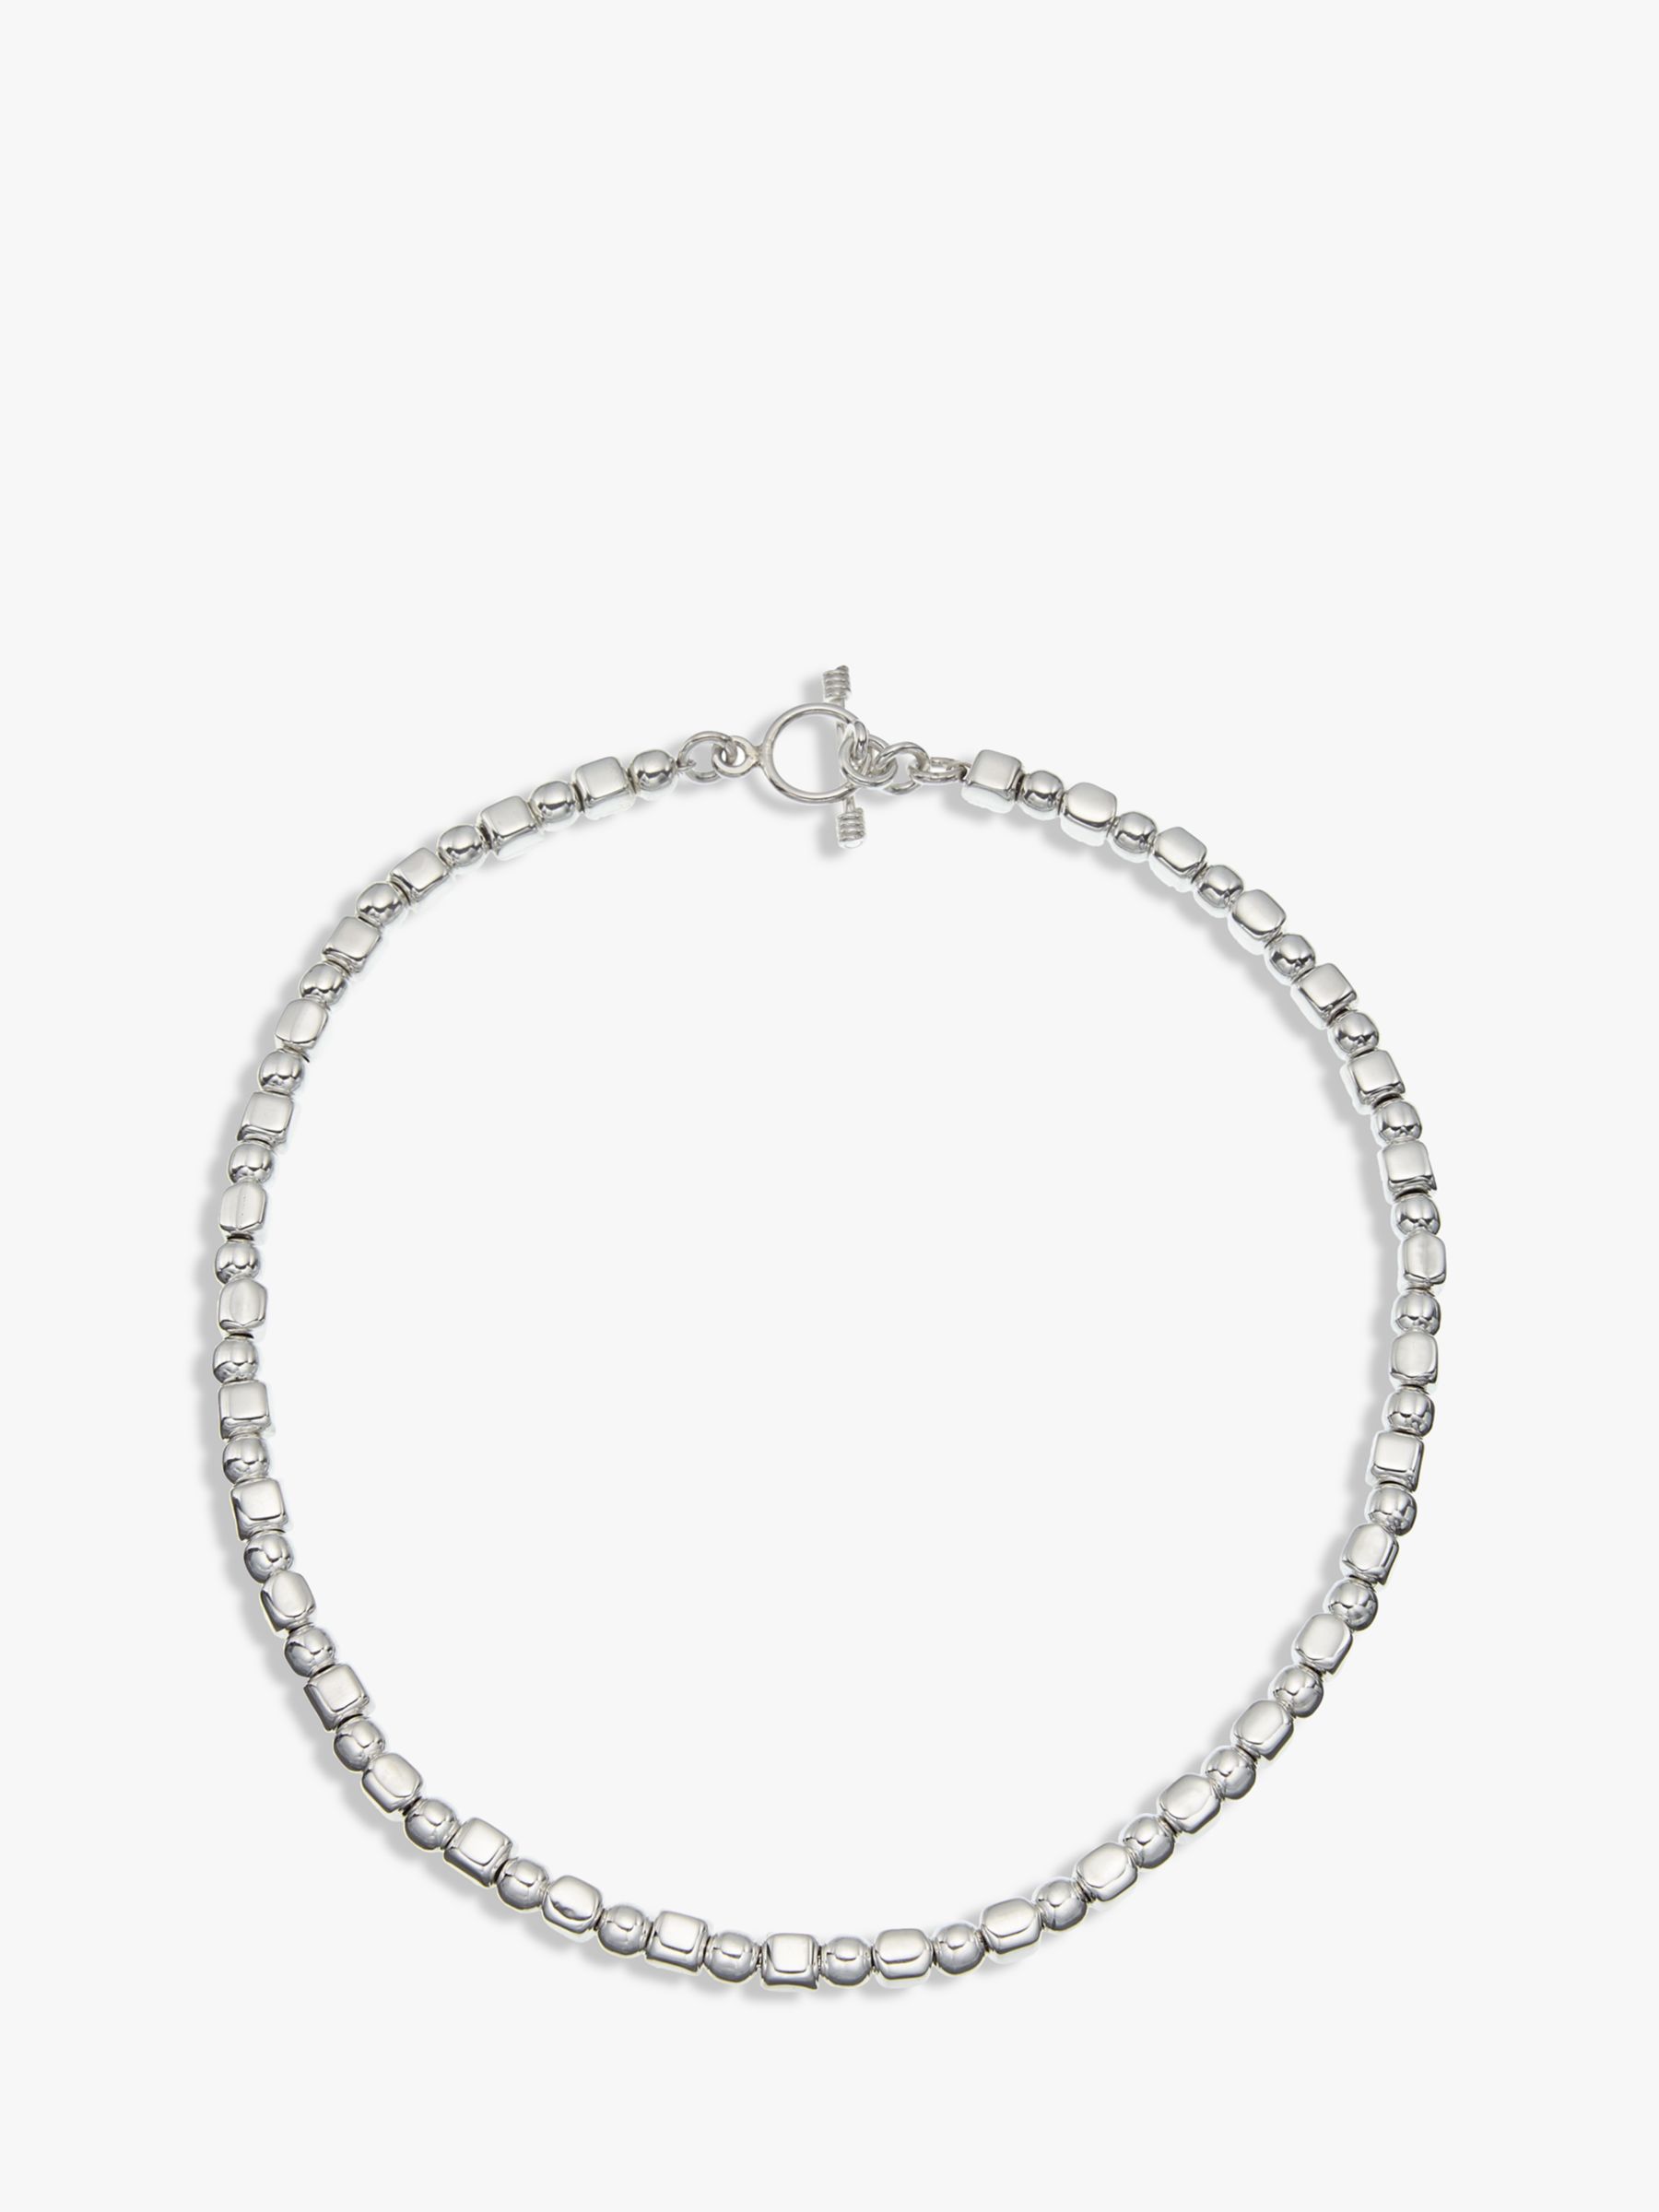 Andea Ball and Cube Necklace, Silver at John Lewis & Partners